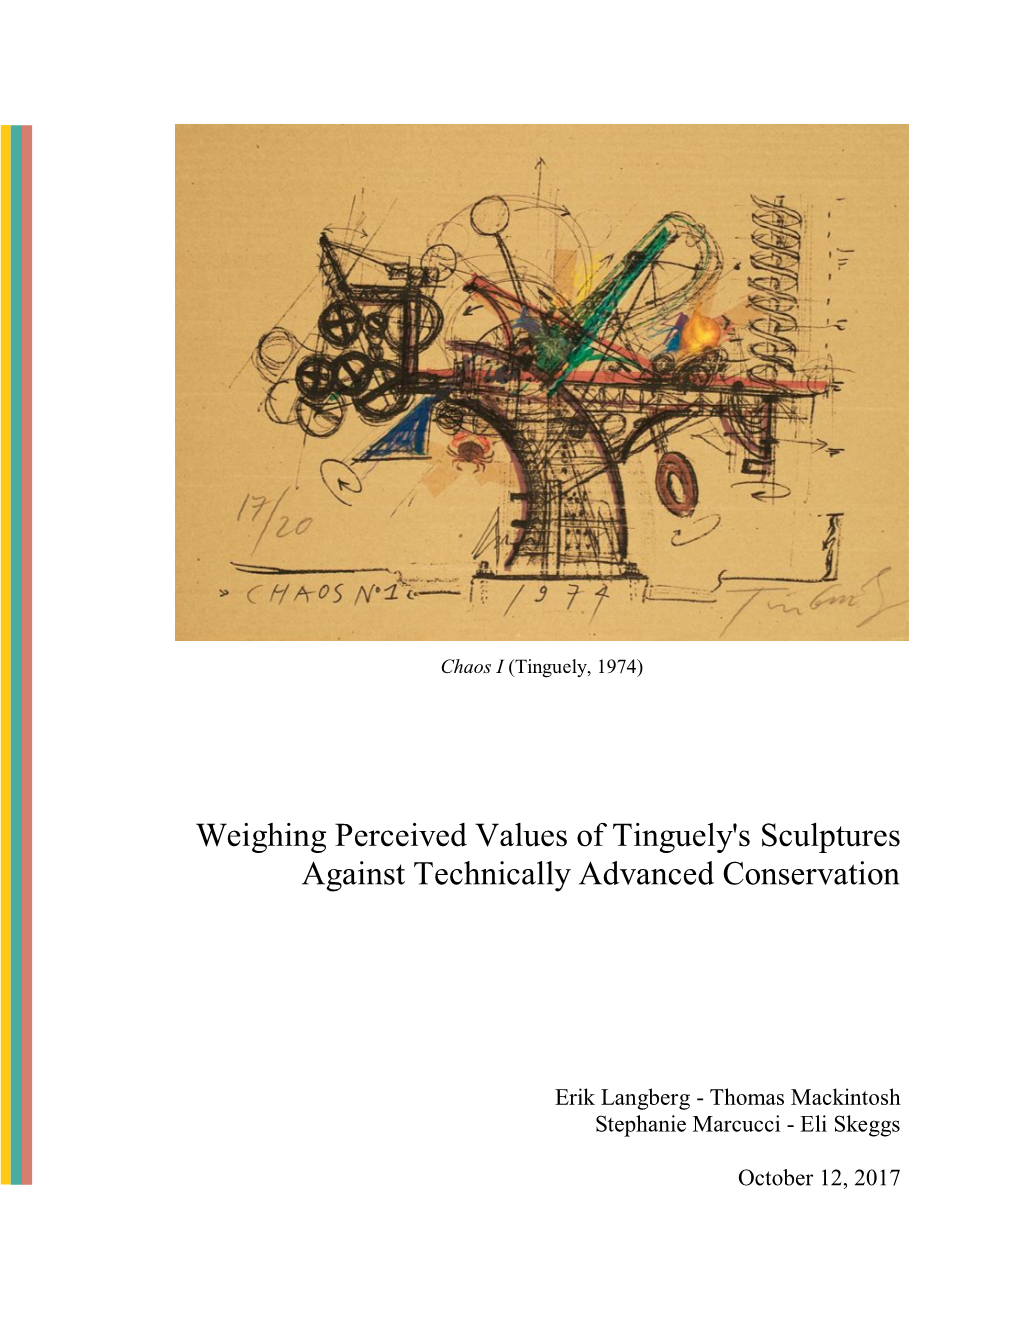 Weighing Perceived Values of Tinguely's Sculptures Against Technically Advanced Conservation